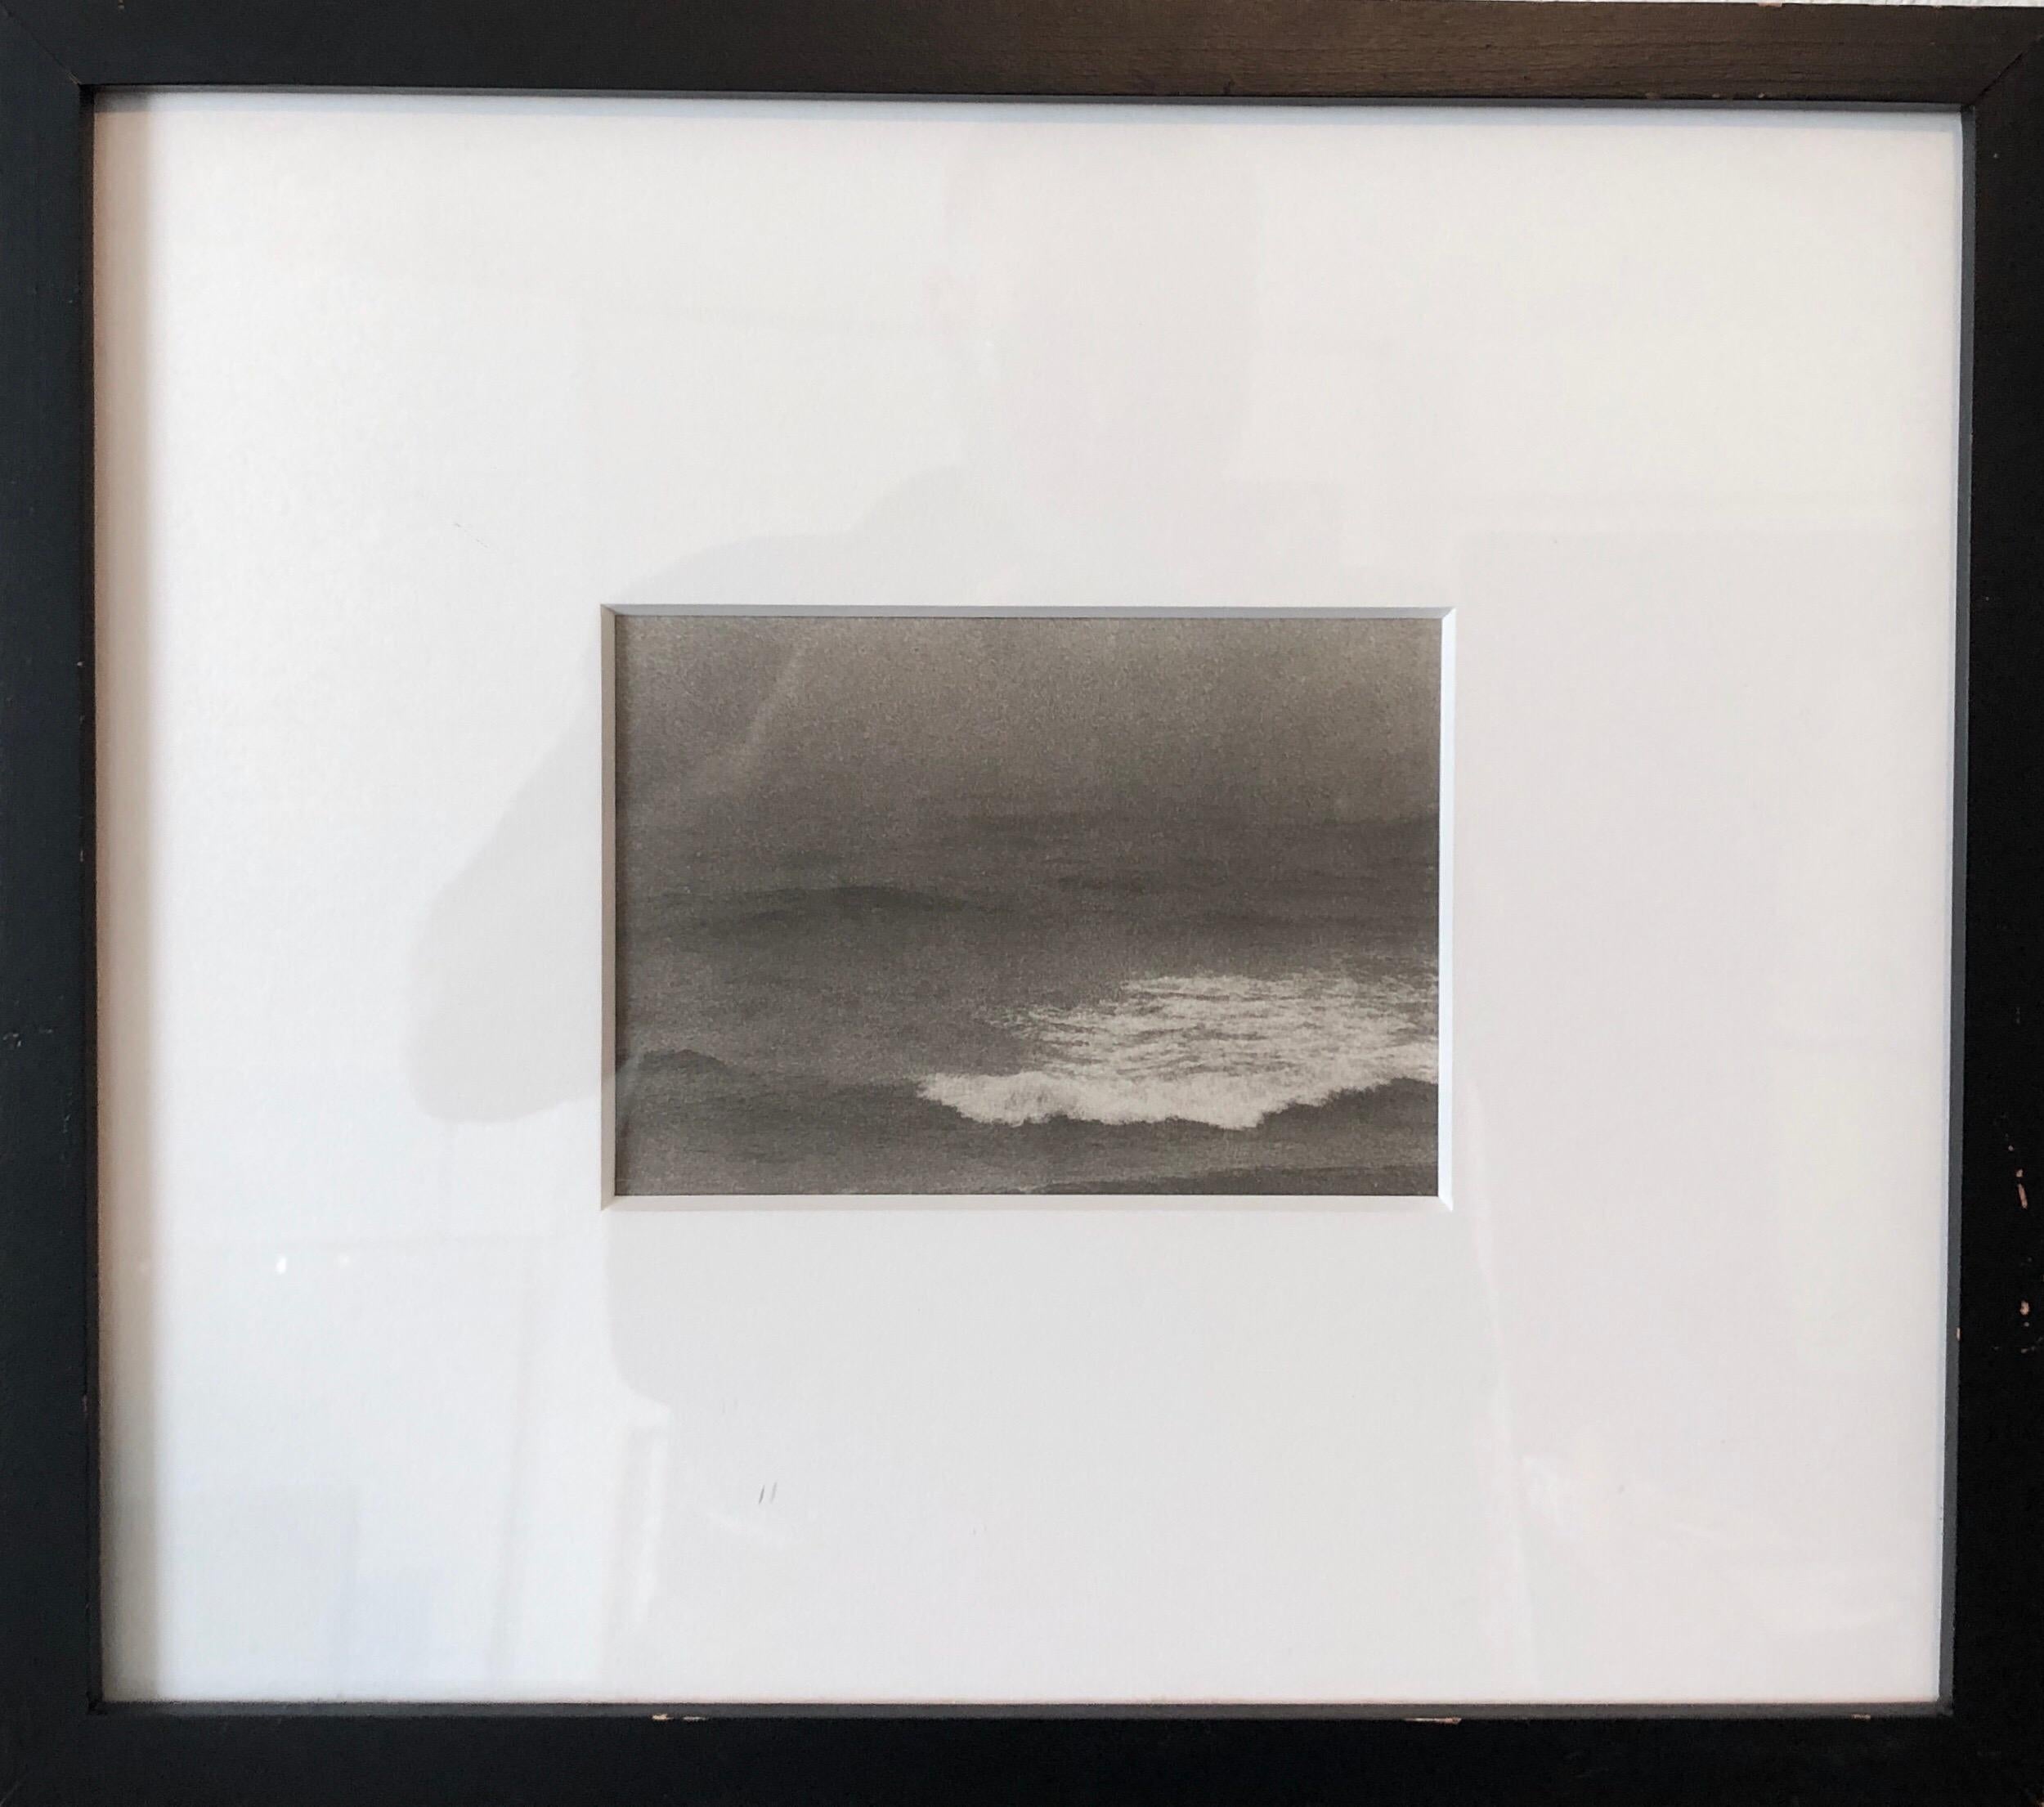 This is a Platinum Palladium print from one of her first ocean-based beach series, a body of platinum/palladium prints that focused on the water's surface. Later, she transferred her attention to architectural remnants of human habitation near the